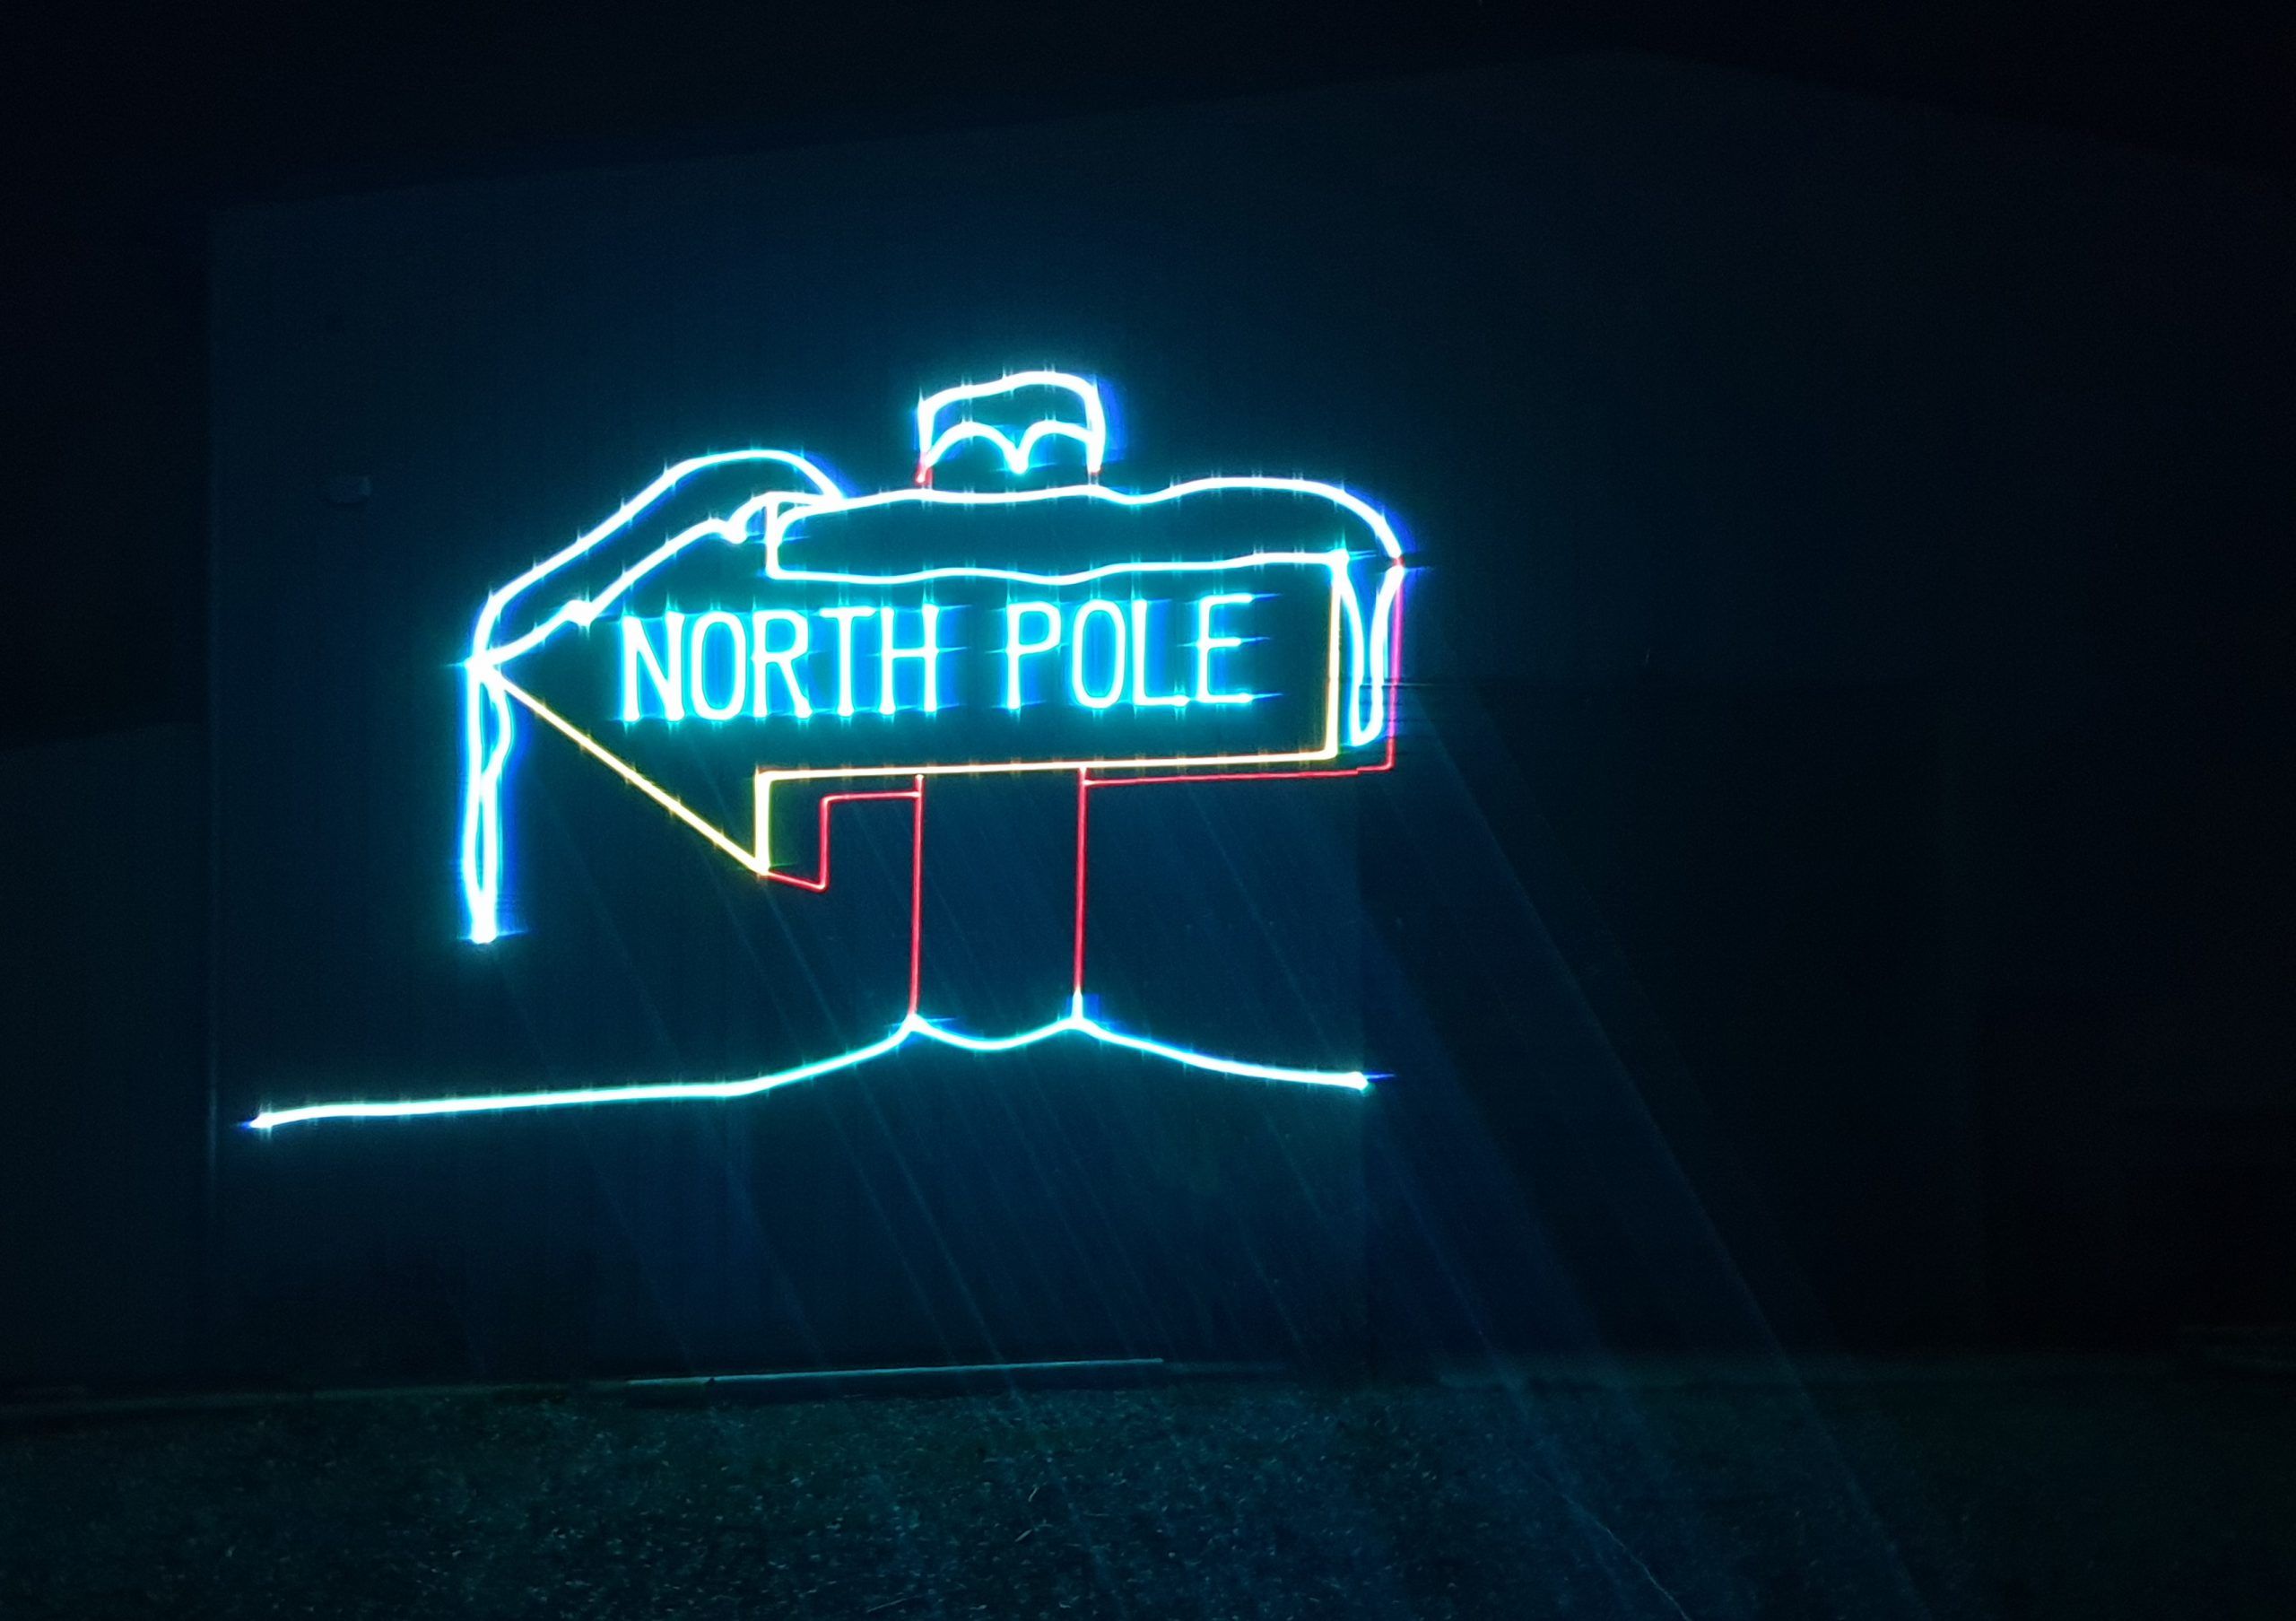 Europe Évènement - Projection of a laser panel with North Pole written on it